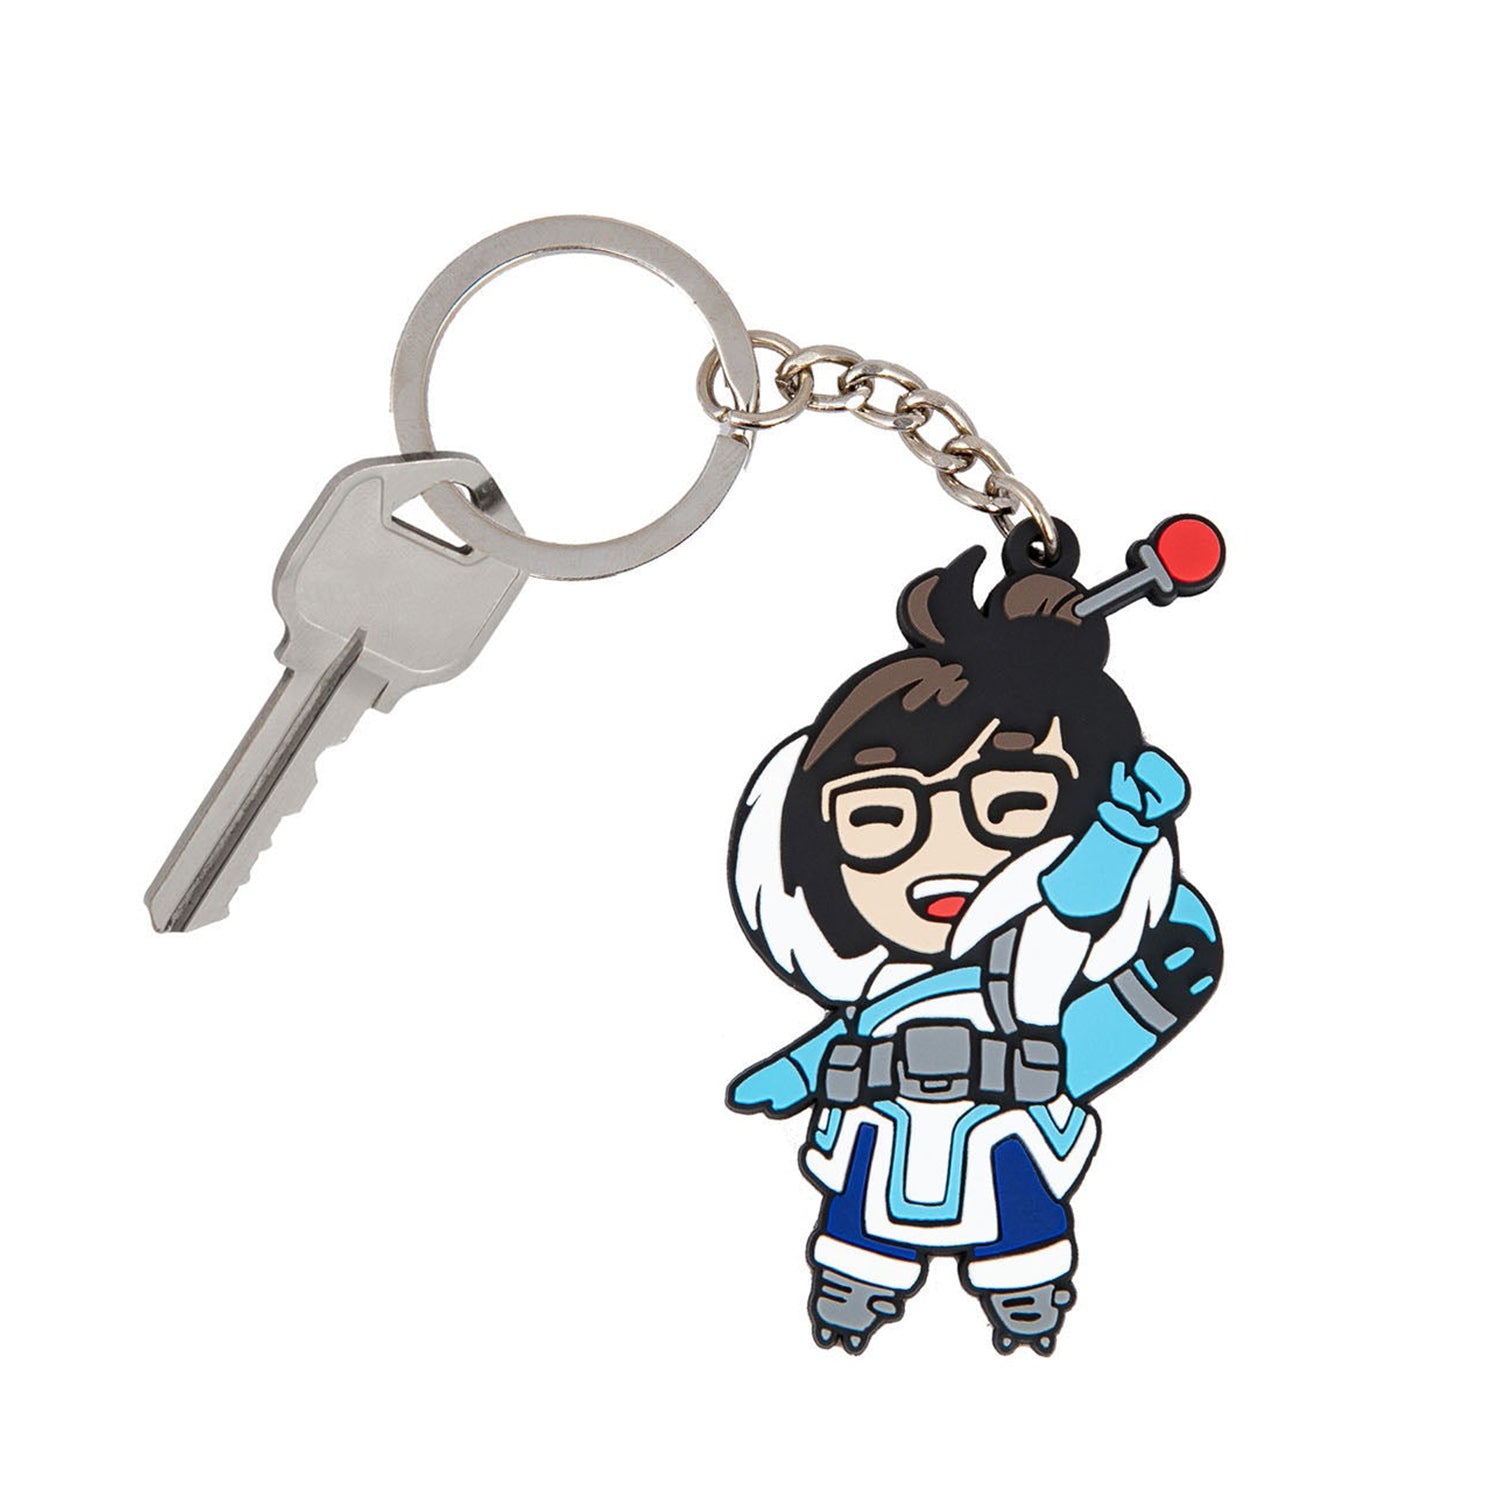 Overwatch Mei J!NX Flat Keychain in Blue - Front View with Key